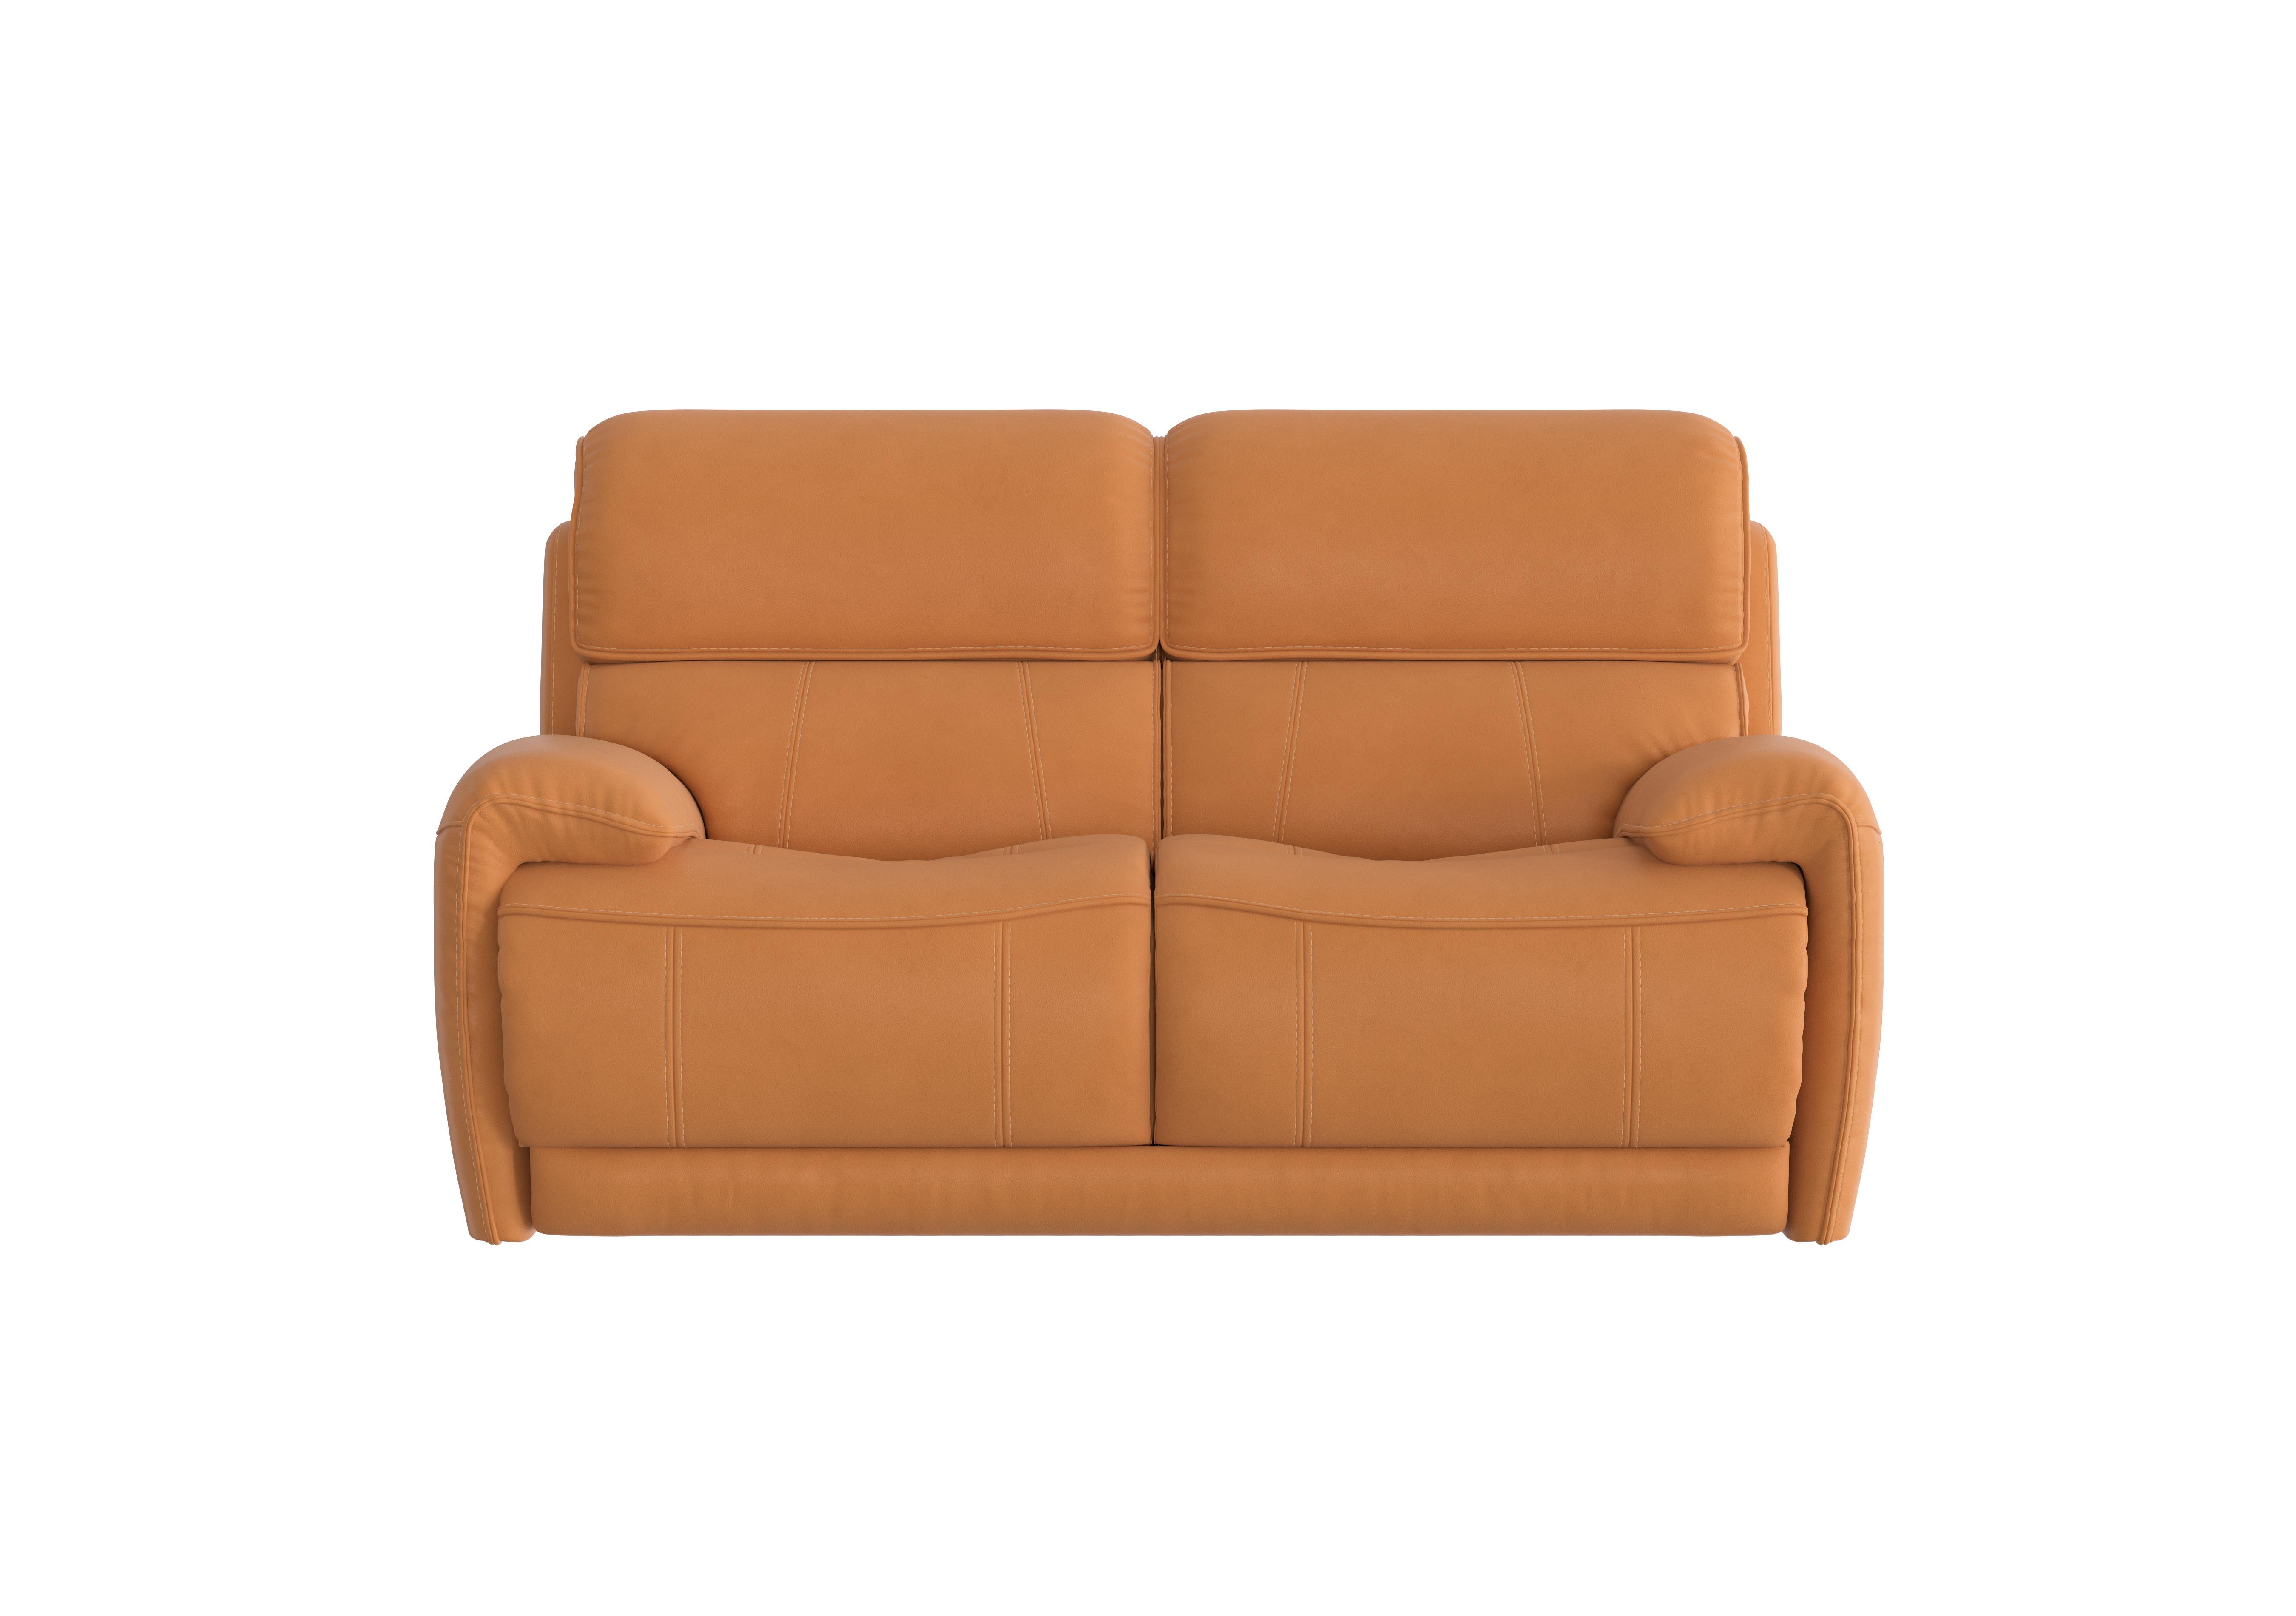 Link 2 Seater Leather Sofa in Bv-335e Honey Yellow on Furniture Village